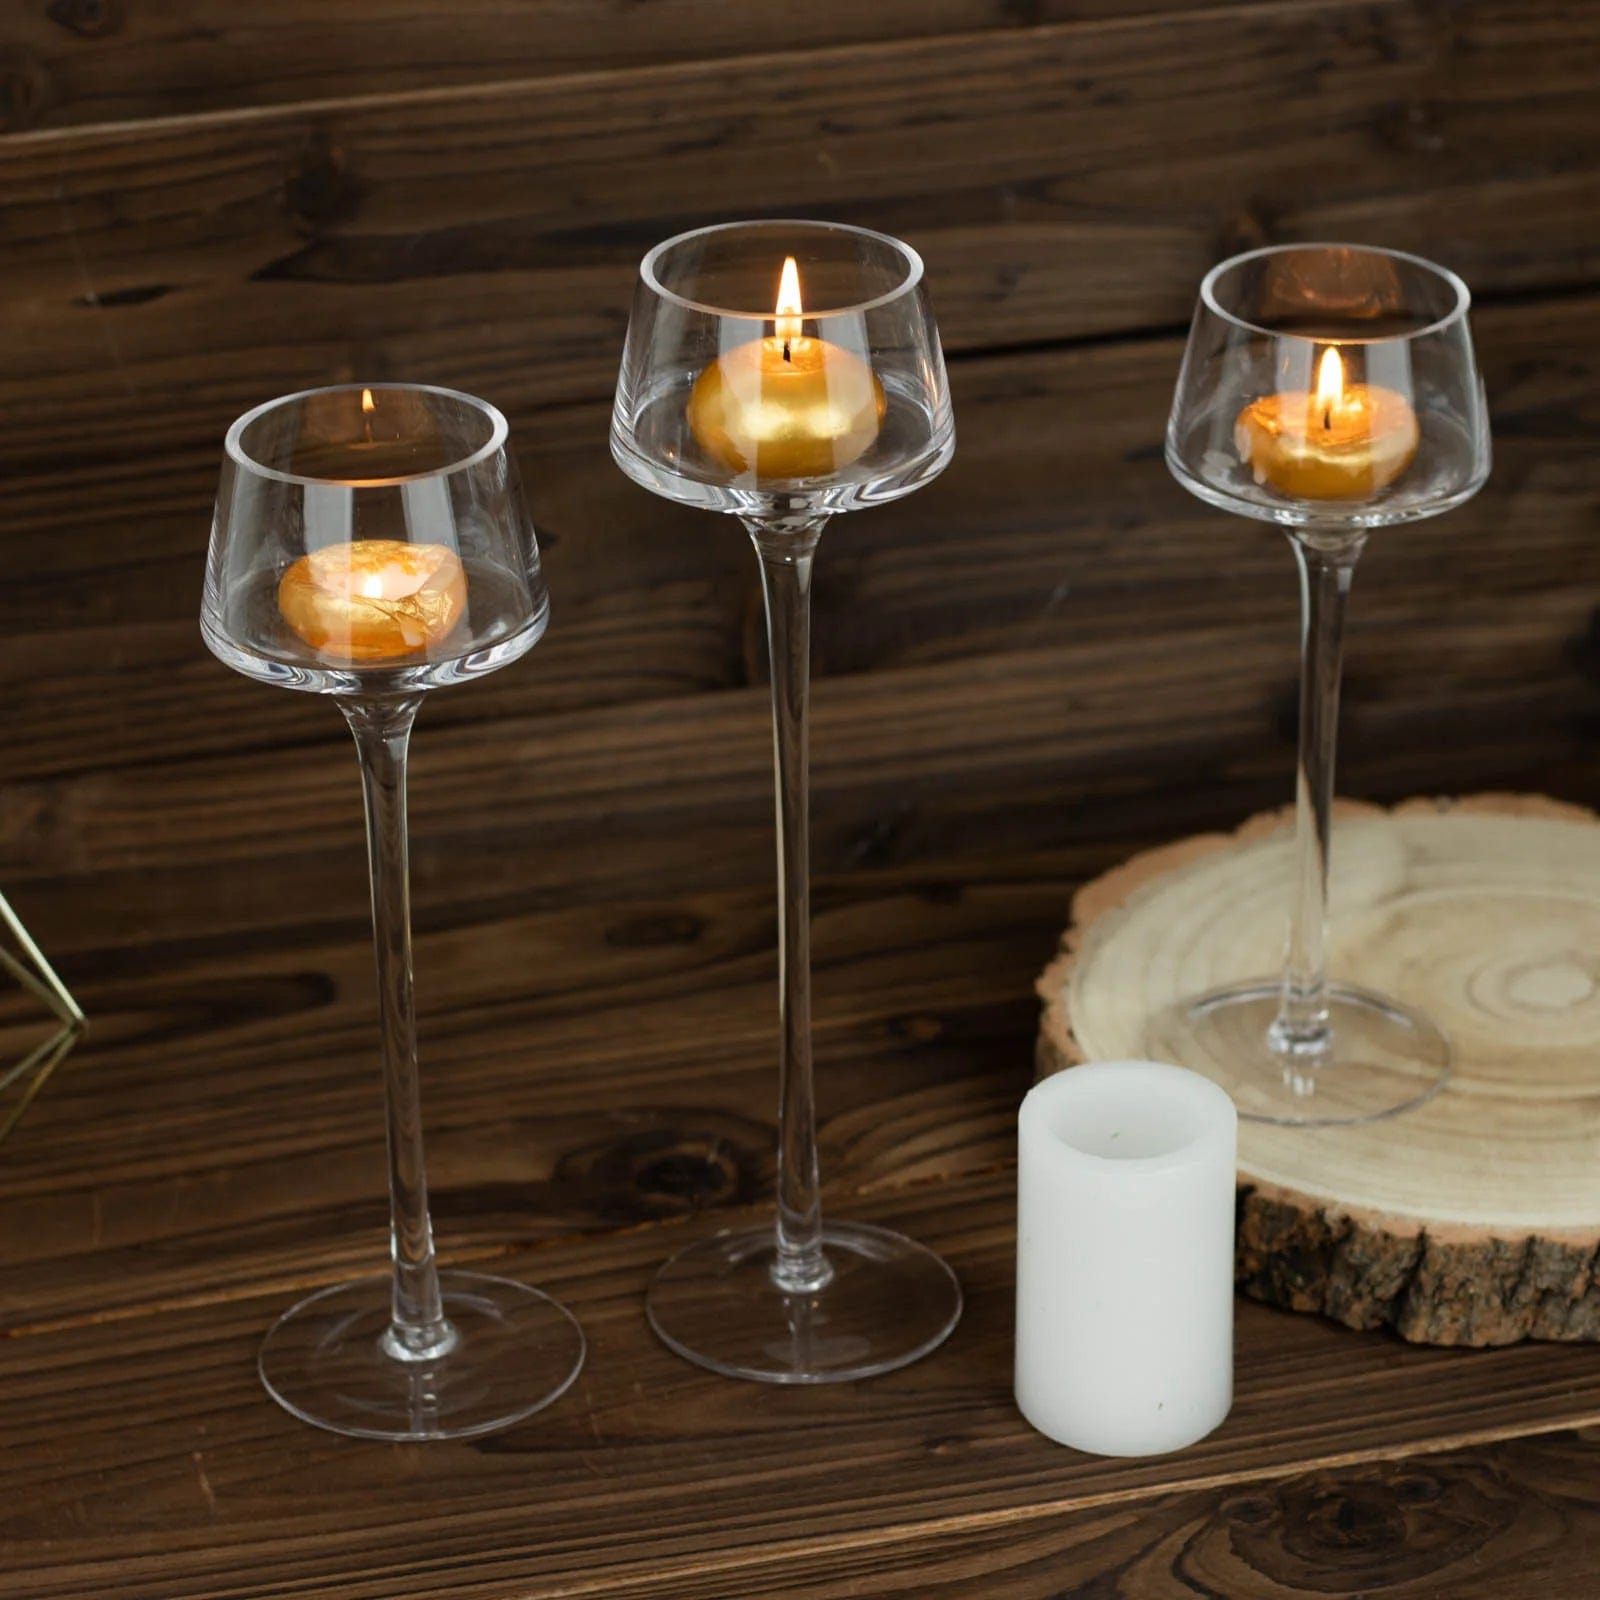 3 Crystal Clear Long Stem Glass Candle Holders Vases